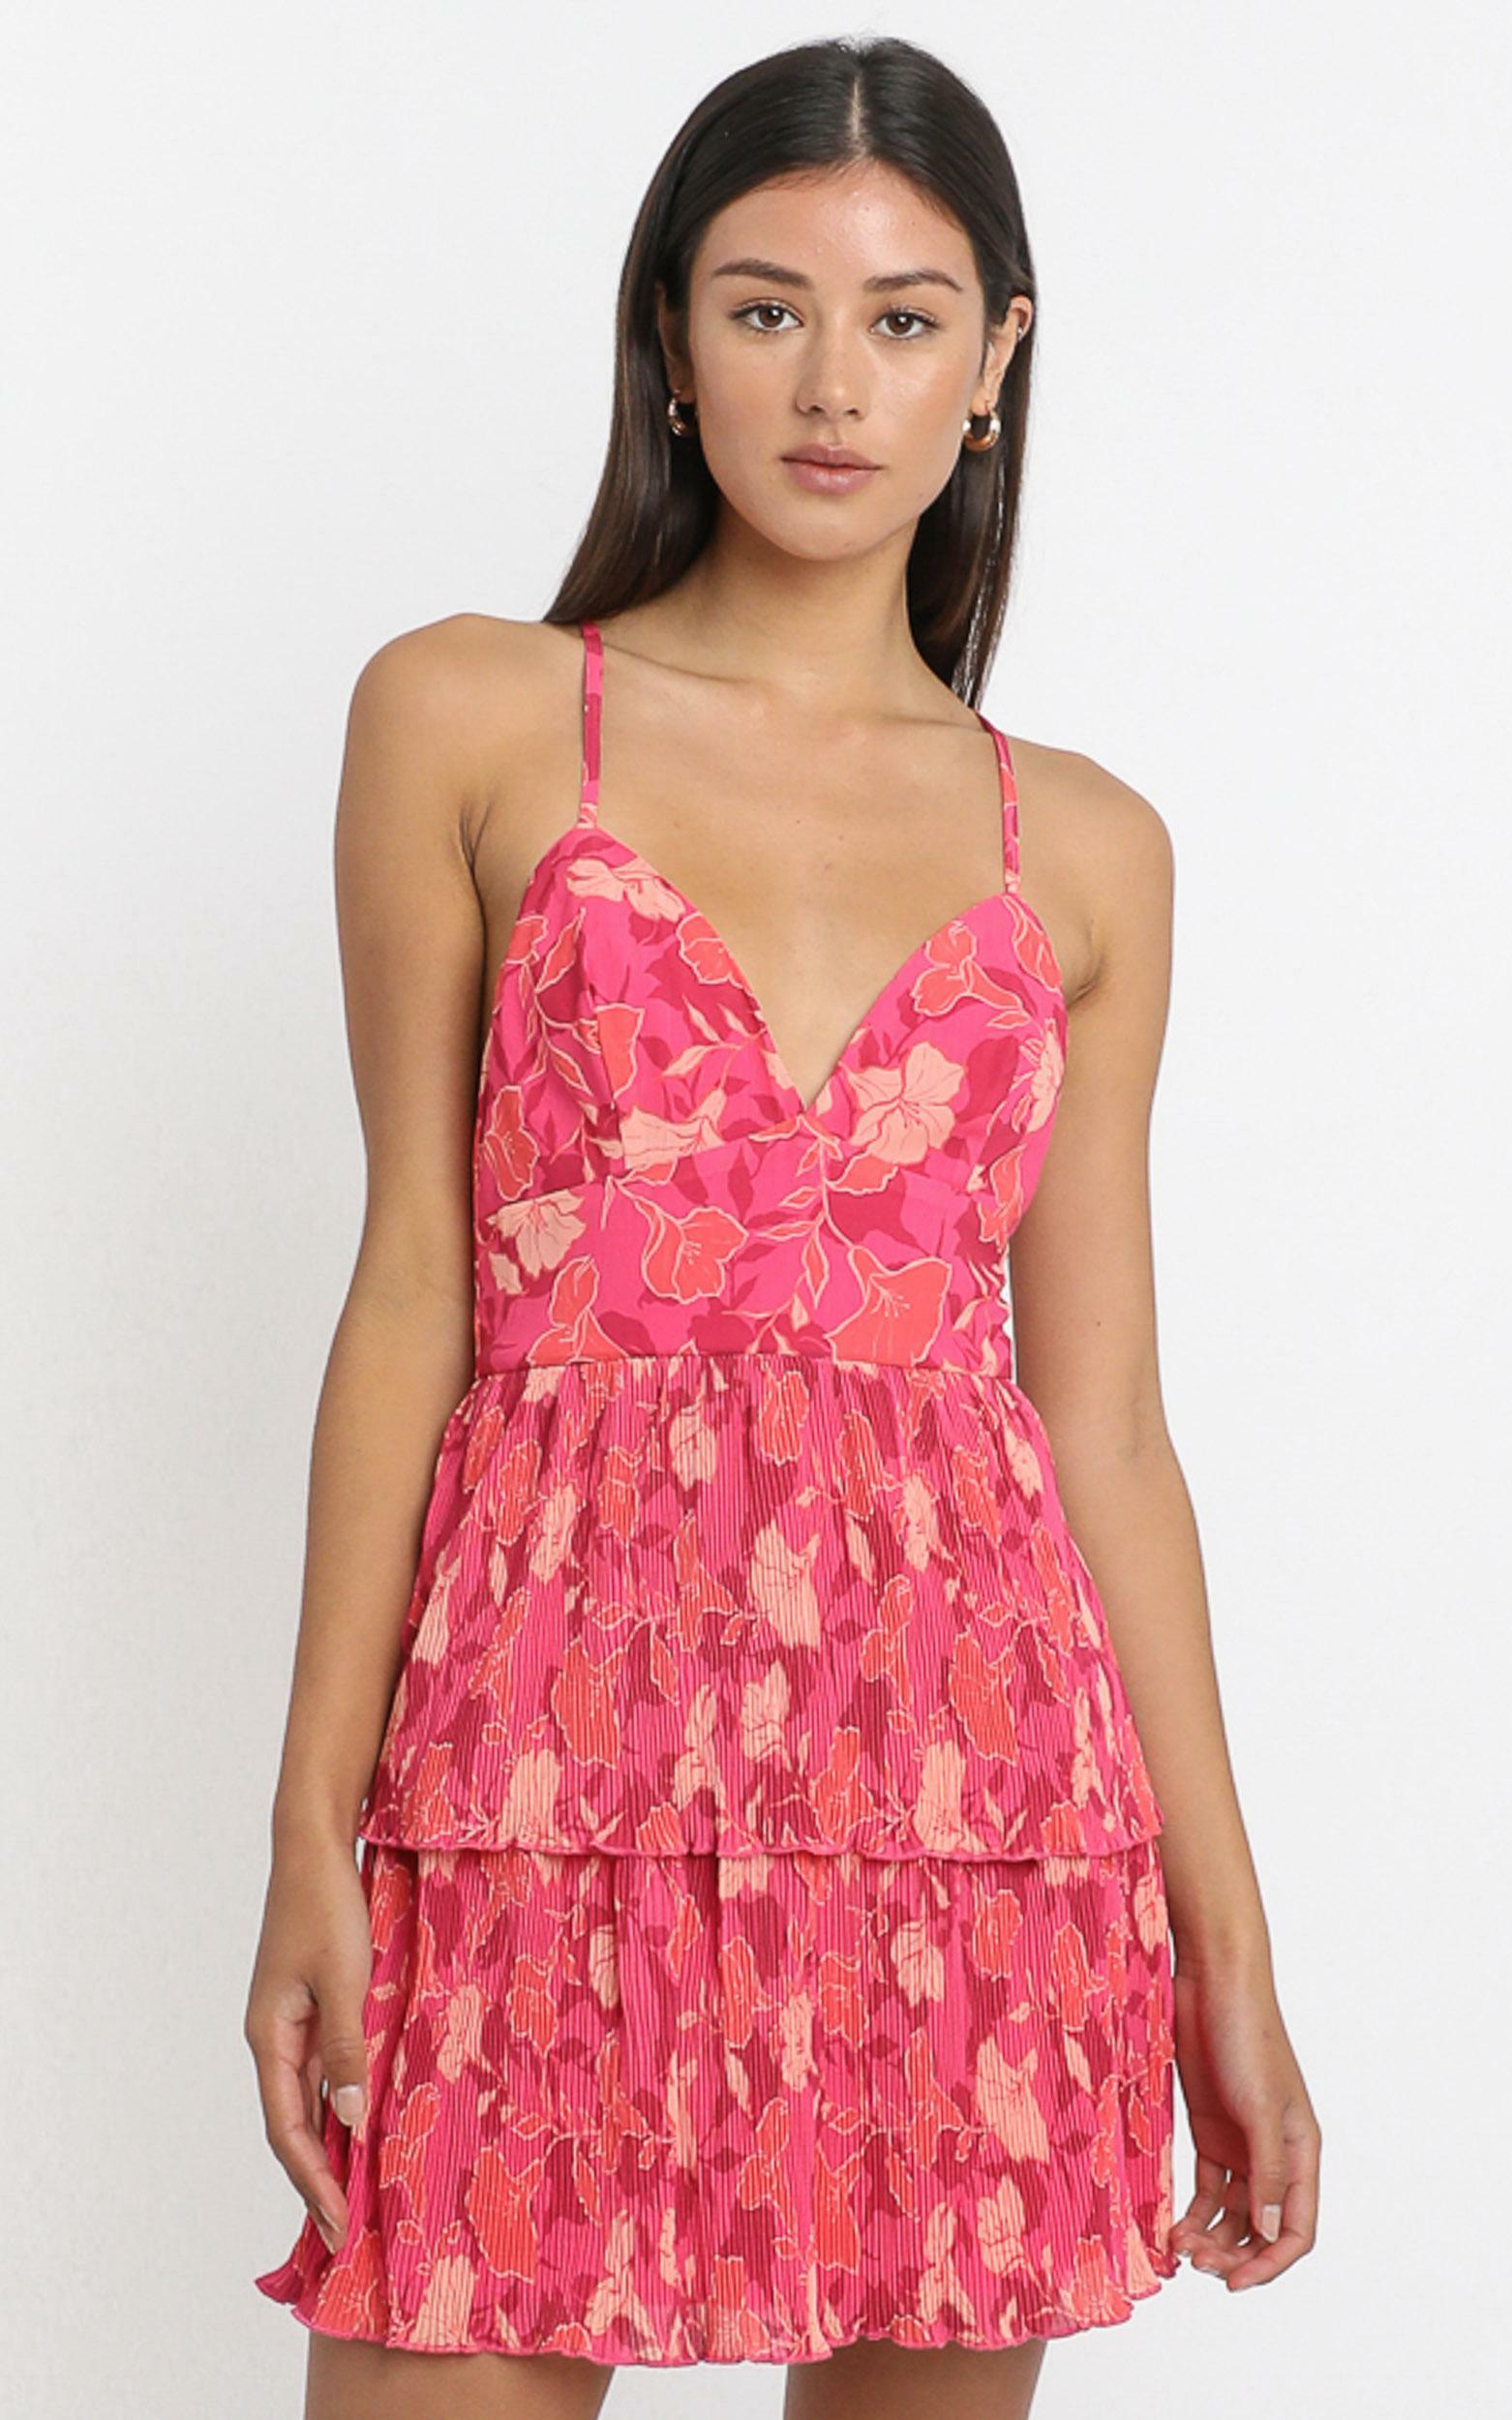 Somethings On My Mind Dress in Berry Floral | Showpo USA